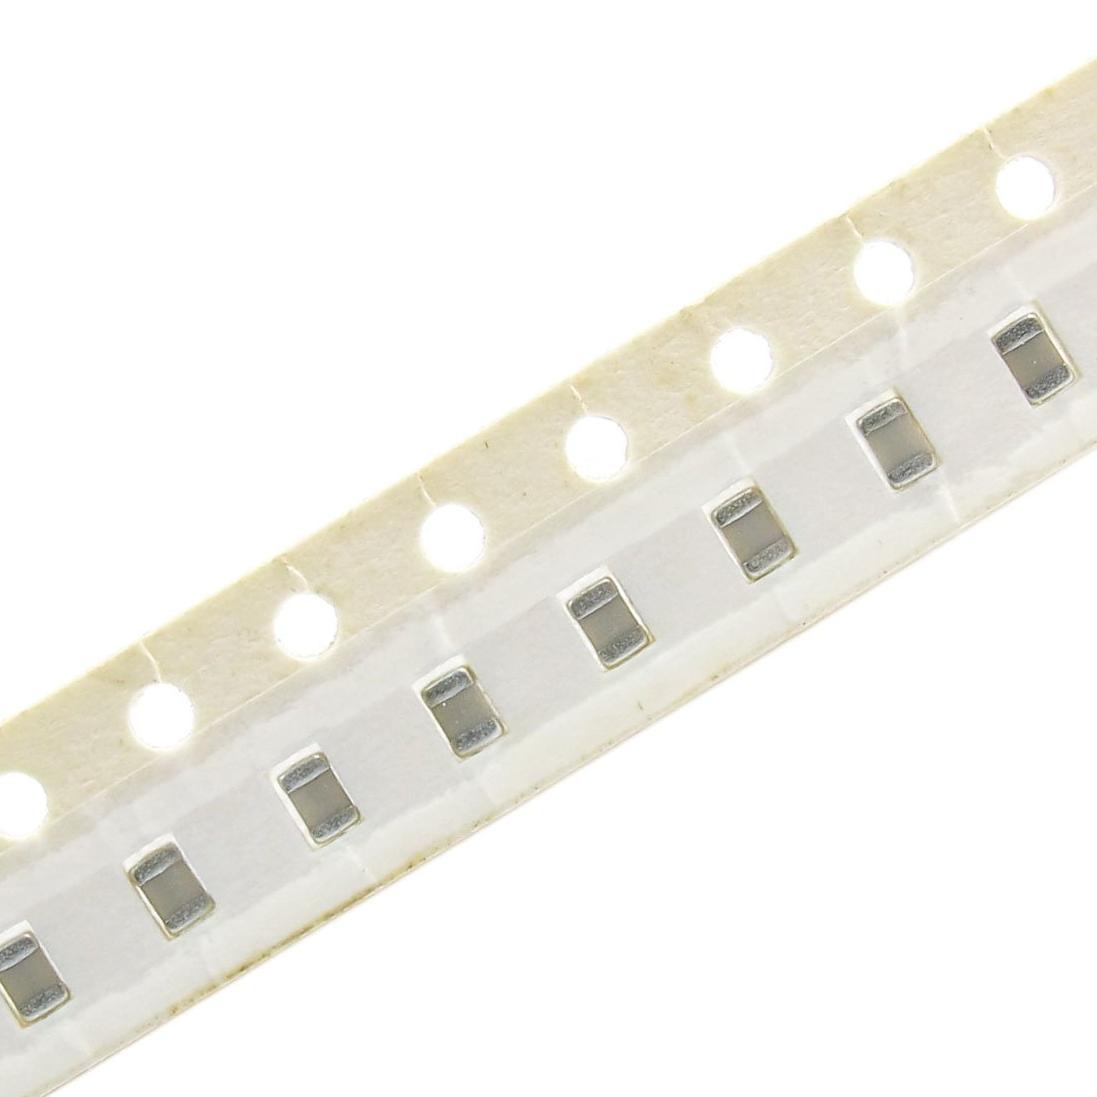  SMD 100pF 0805 C0G(NP0)